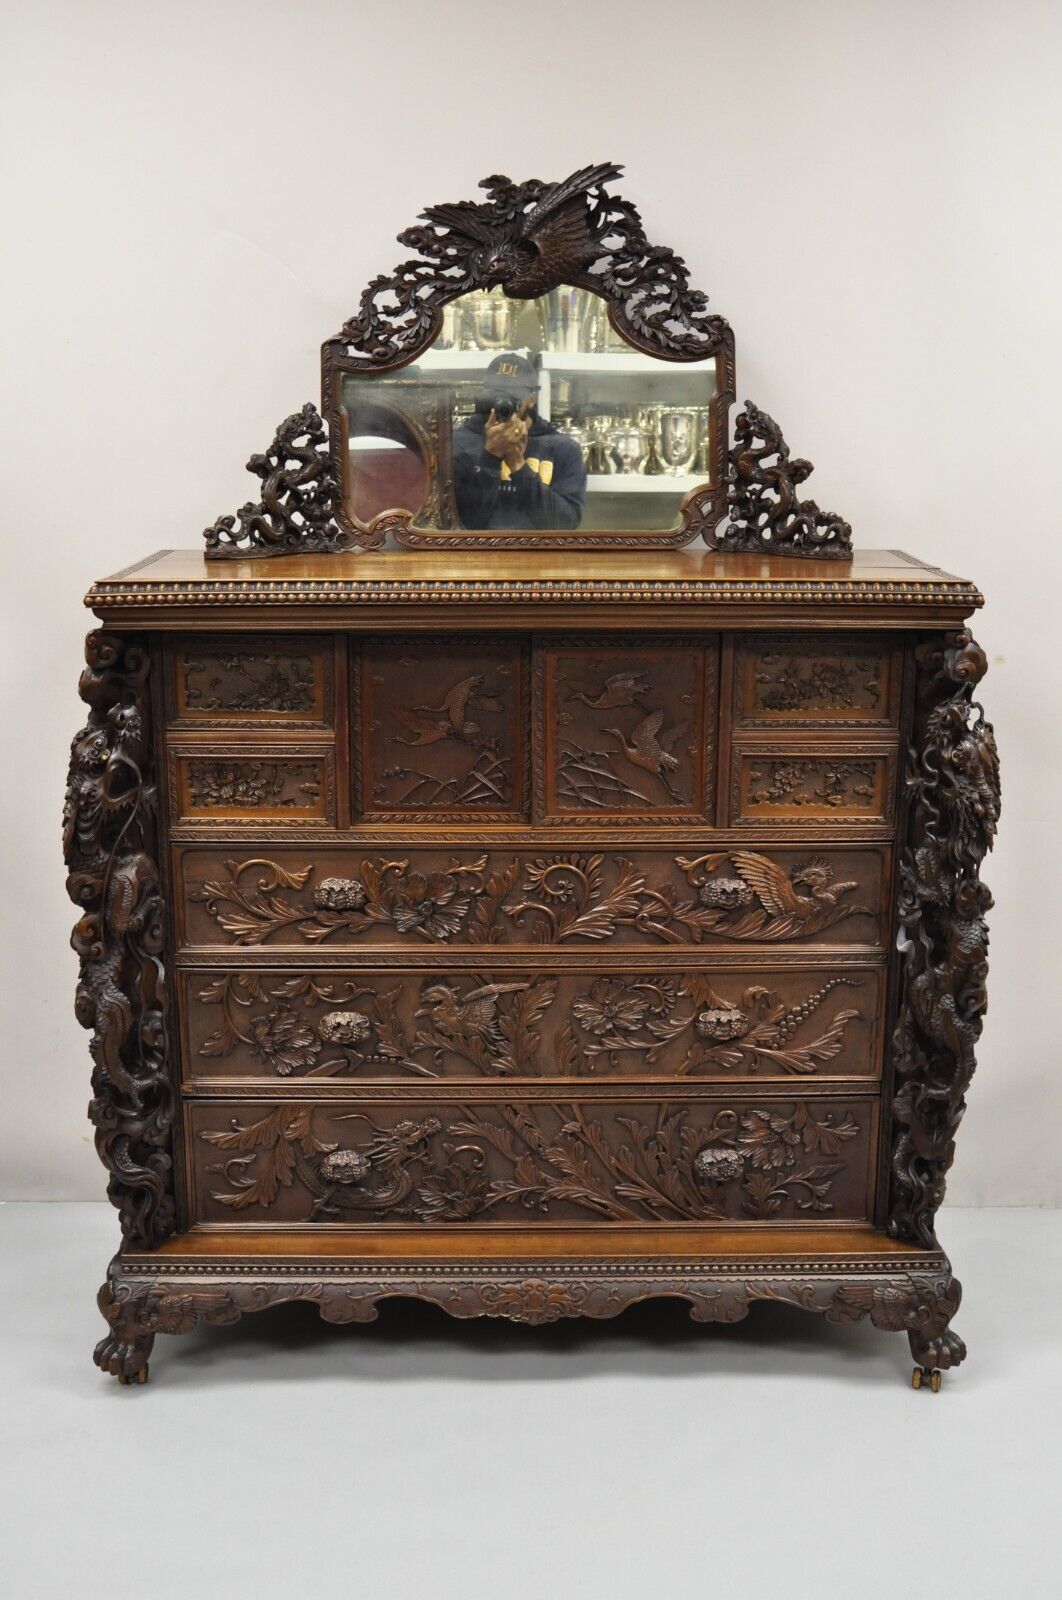 Japanese Art Nouveau Dragon Carved Dresser Cabinet, Chest of Drawers w/ Mirror